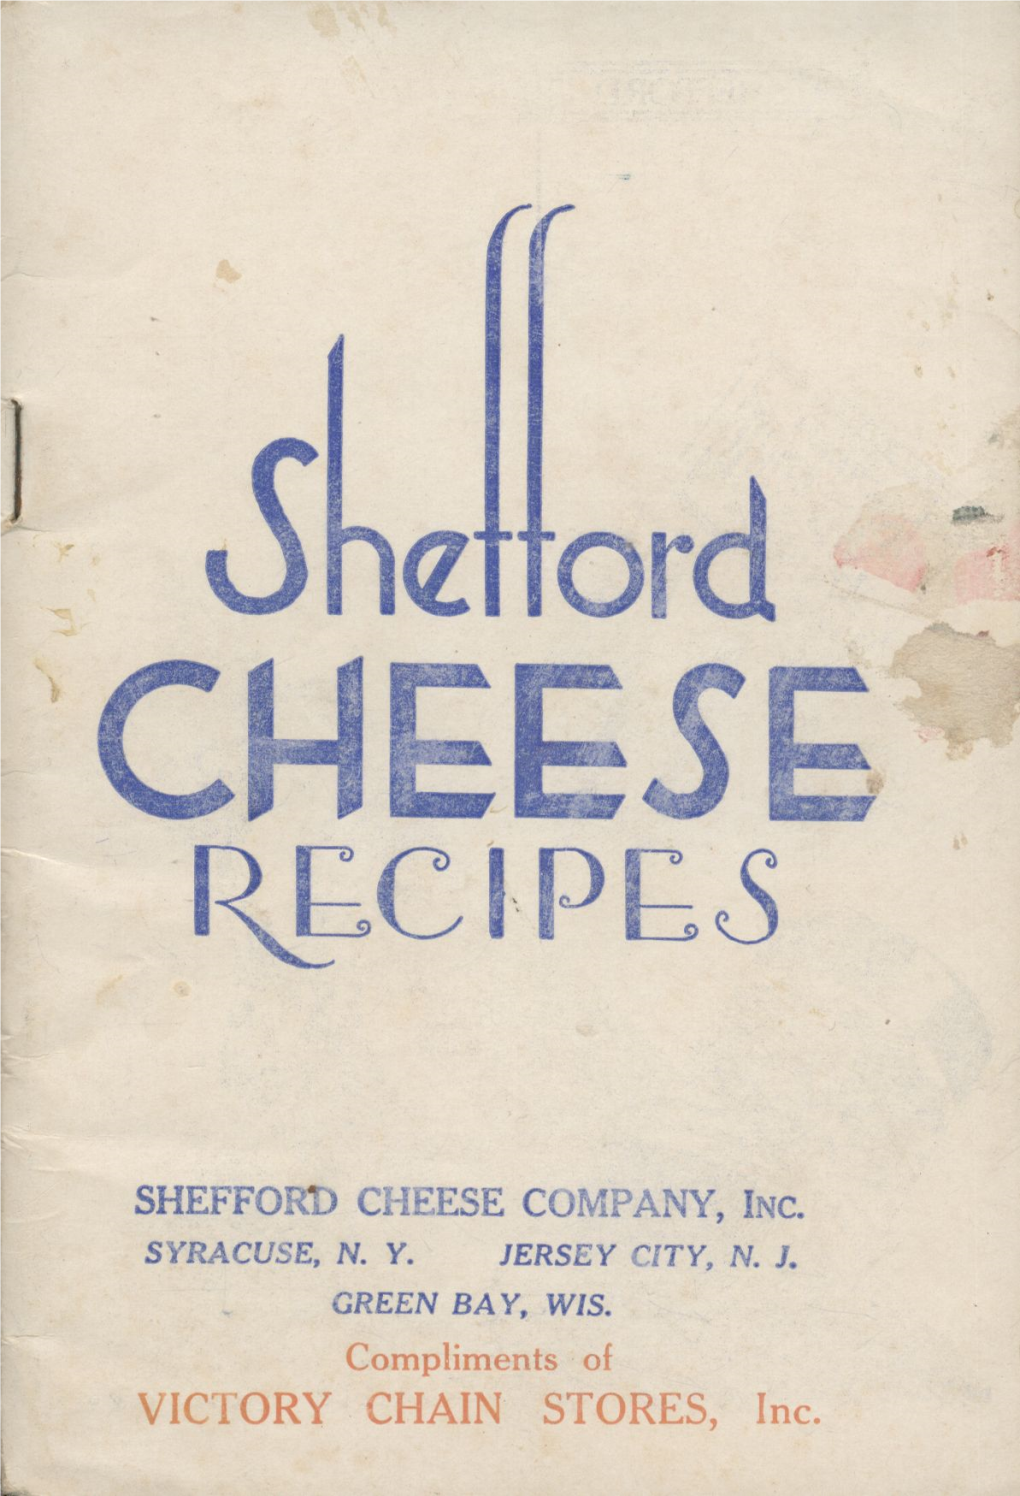 SHEFFORD CHEESE COMPANY, INC. Compliments Of